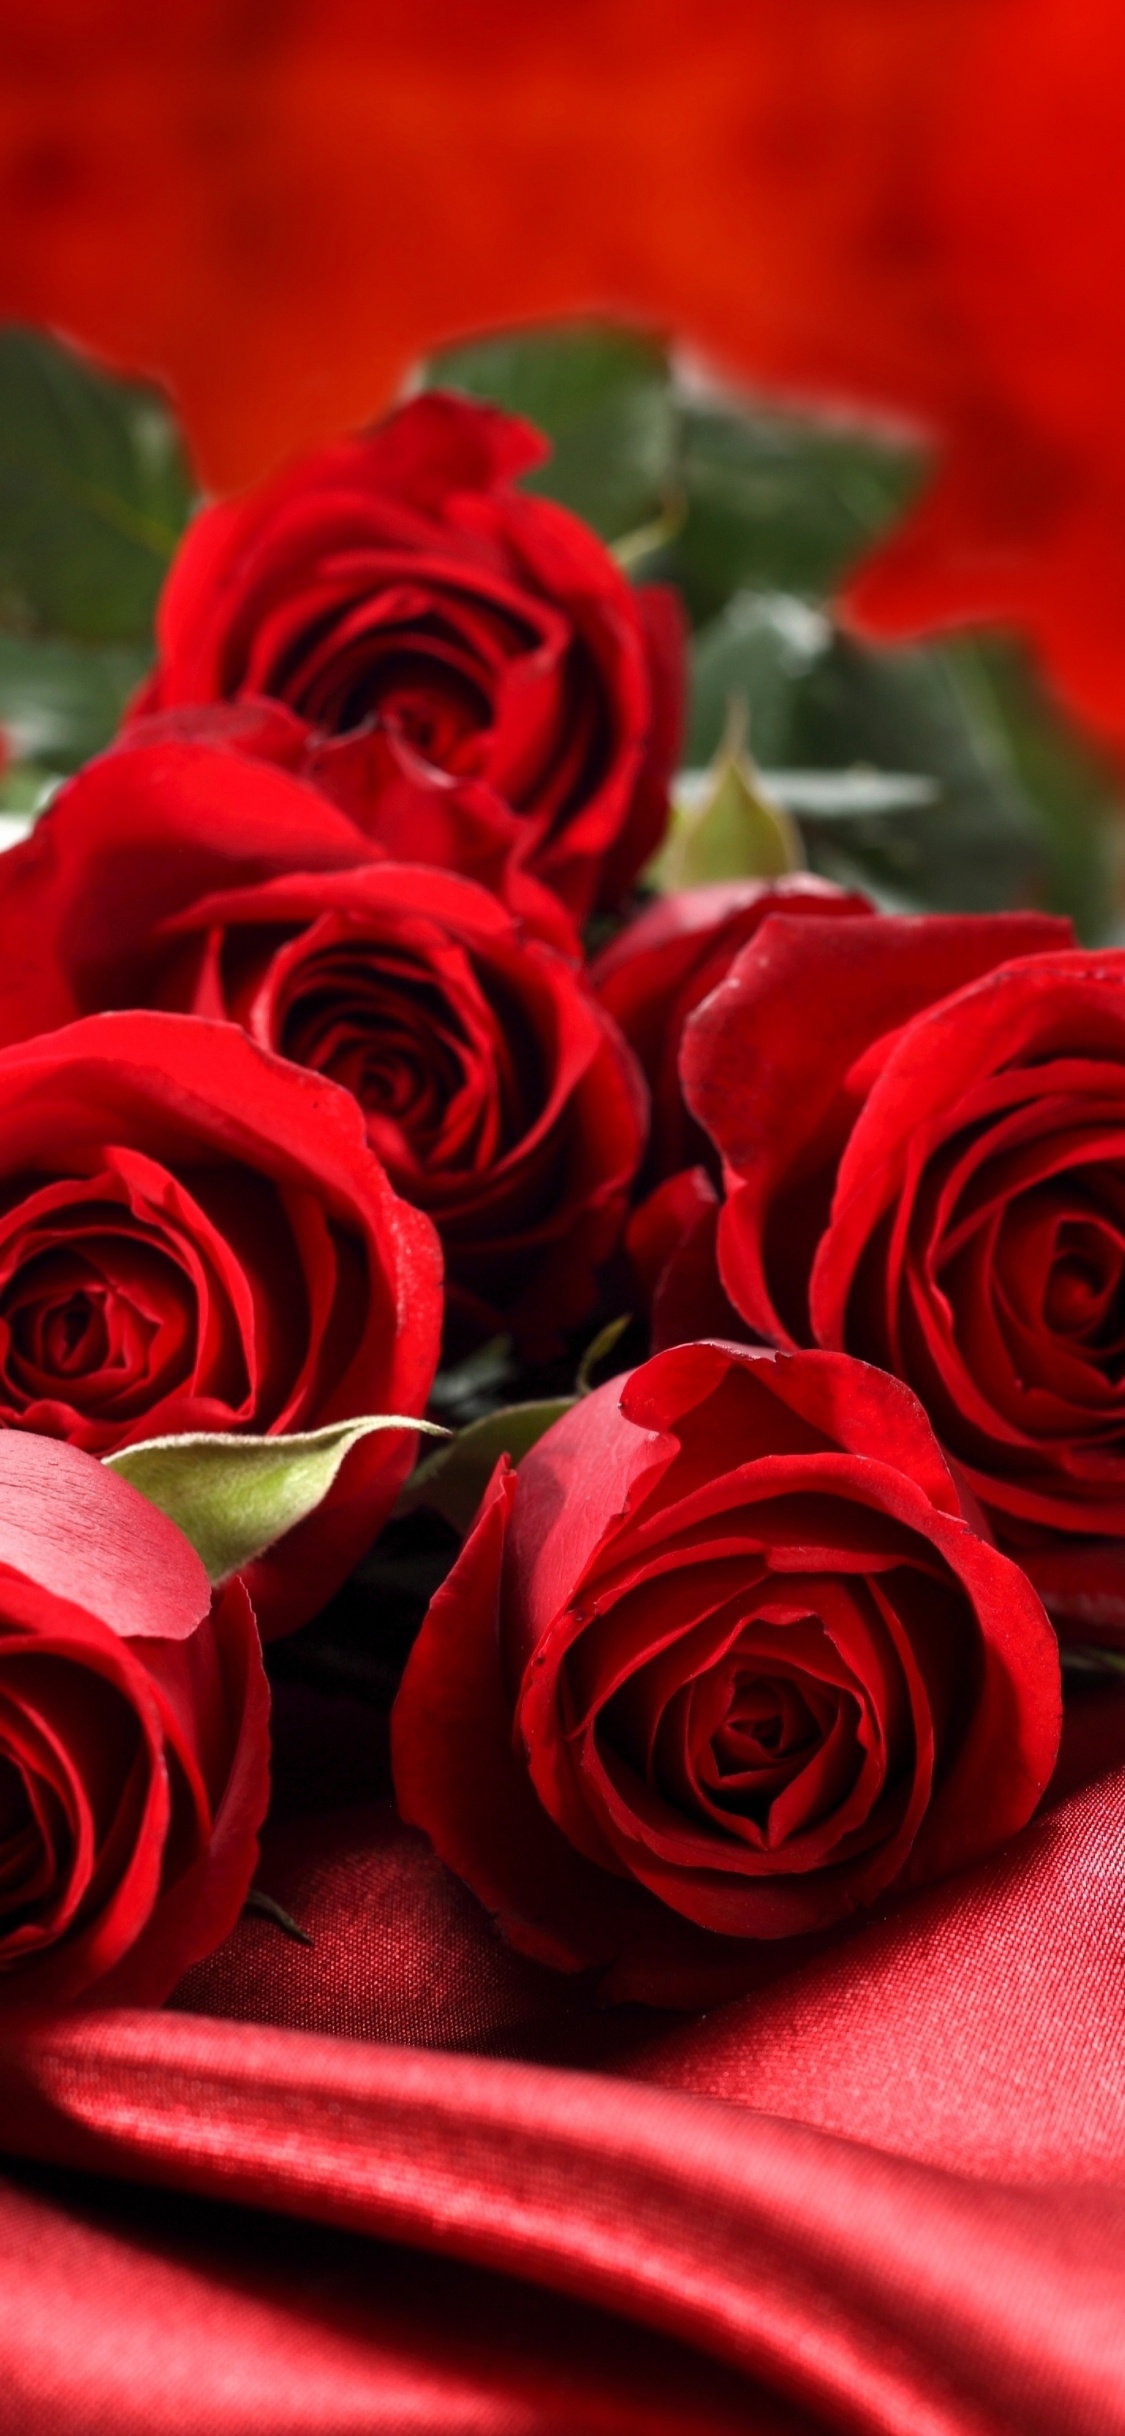 Red Roses on Red Textile. Wallpaper in 1125x2436 Resolution